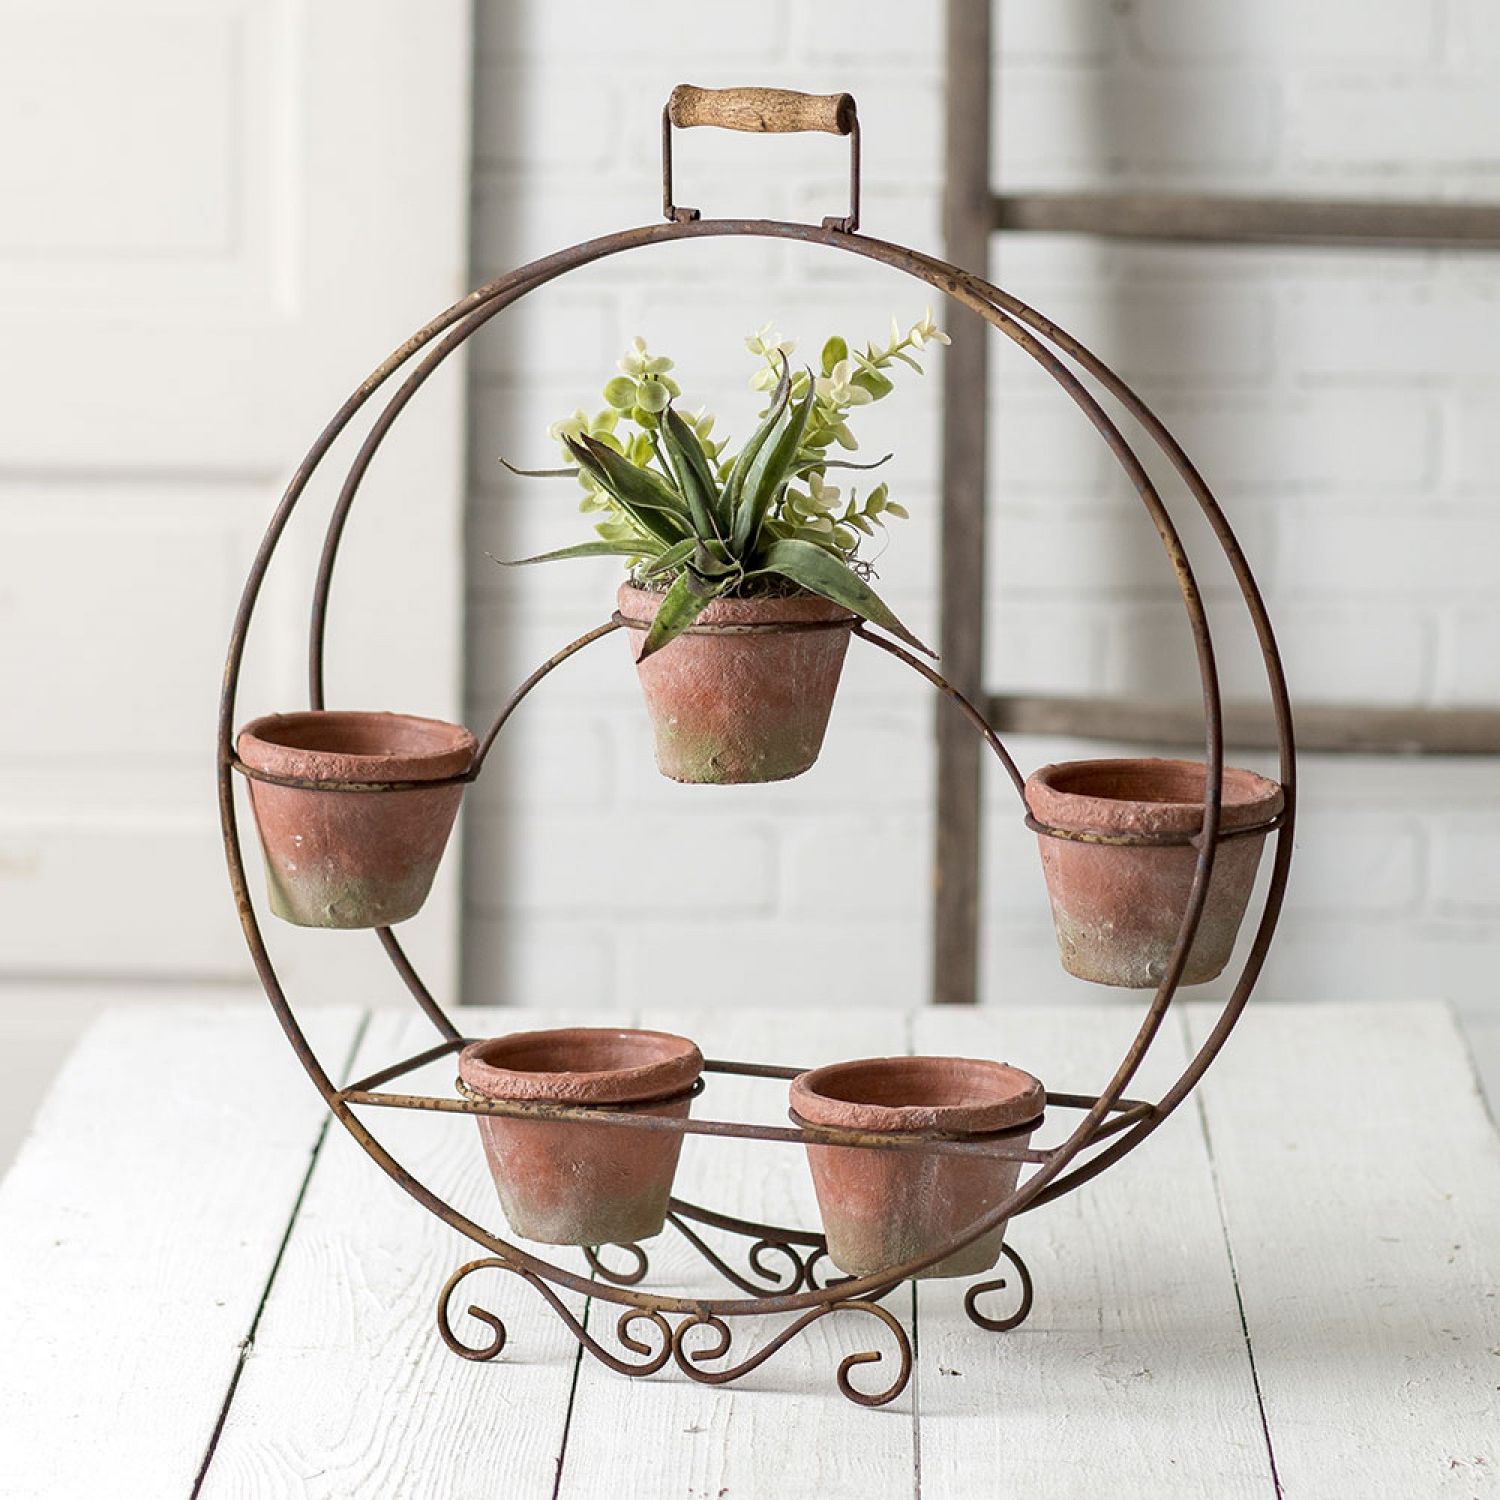 Farmhouse Rustic Round Plant Stand With Terra Cotta Pots Within Most Recent Round Plant Stands (View 14 of 15)